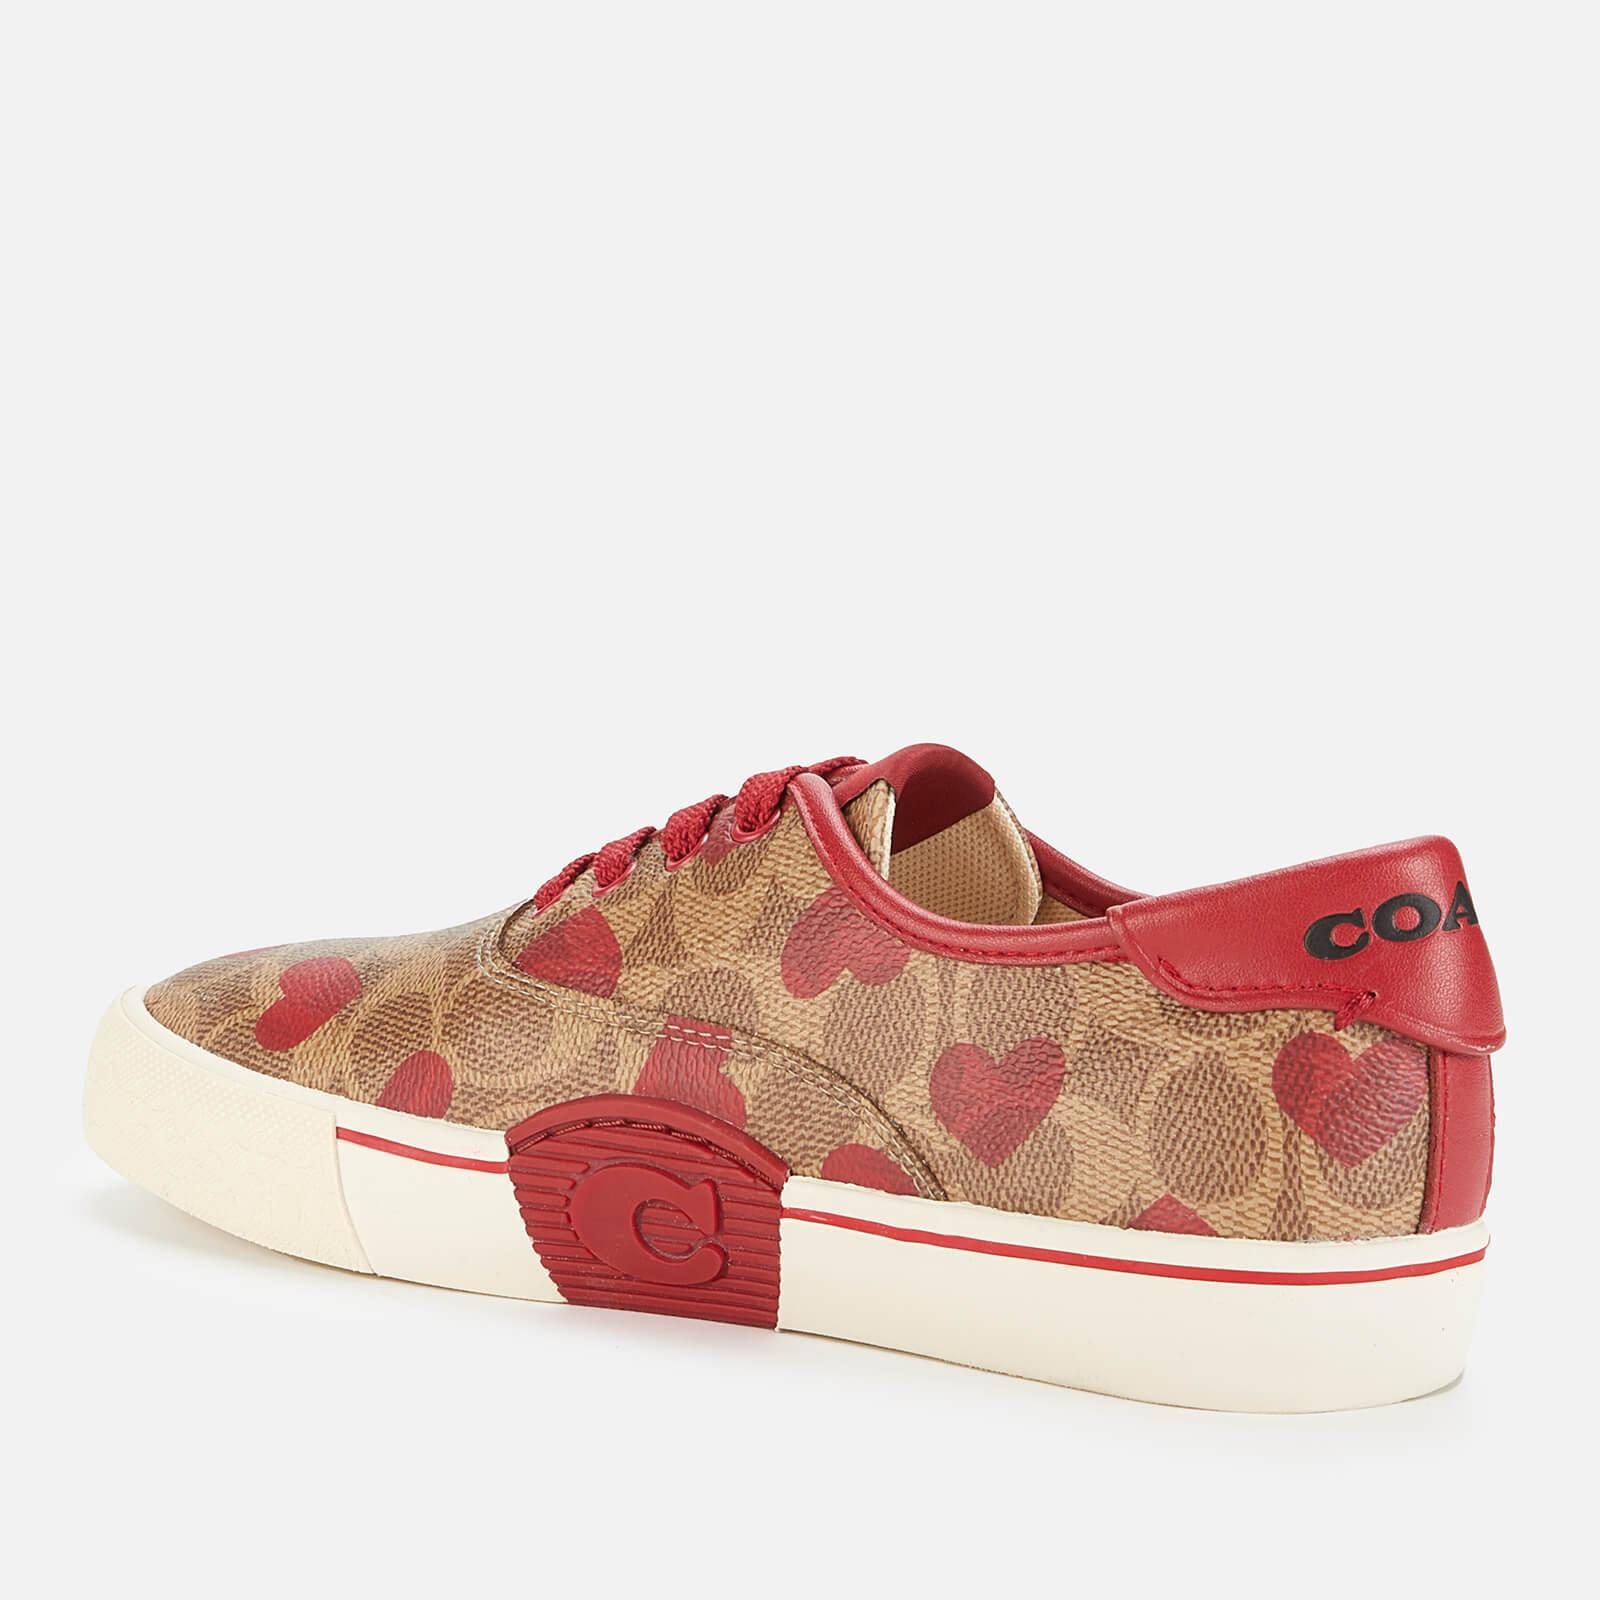 synonymordbog Bane Erhvervelse COACH Citysole Skate Trainers in Red | Lyst